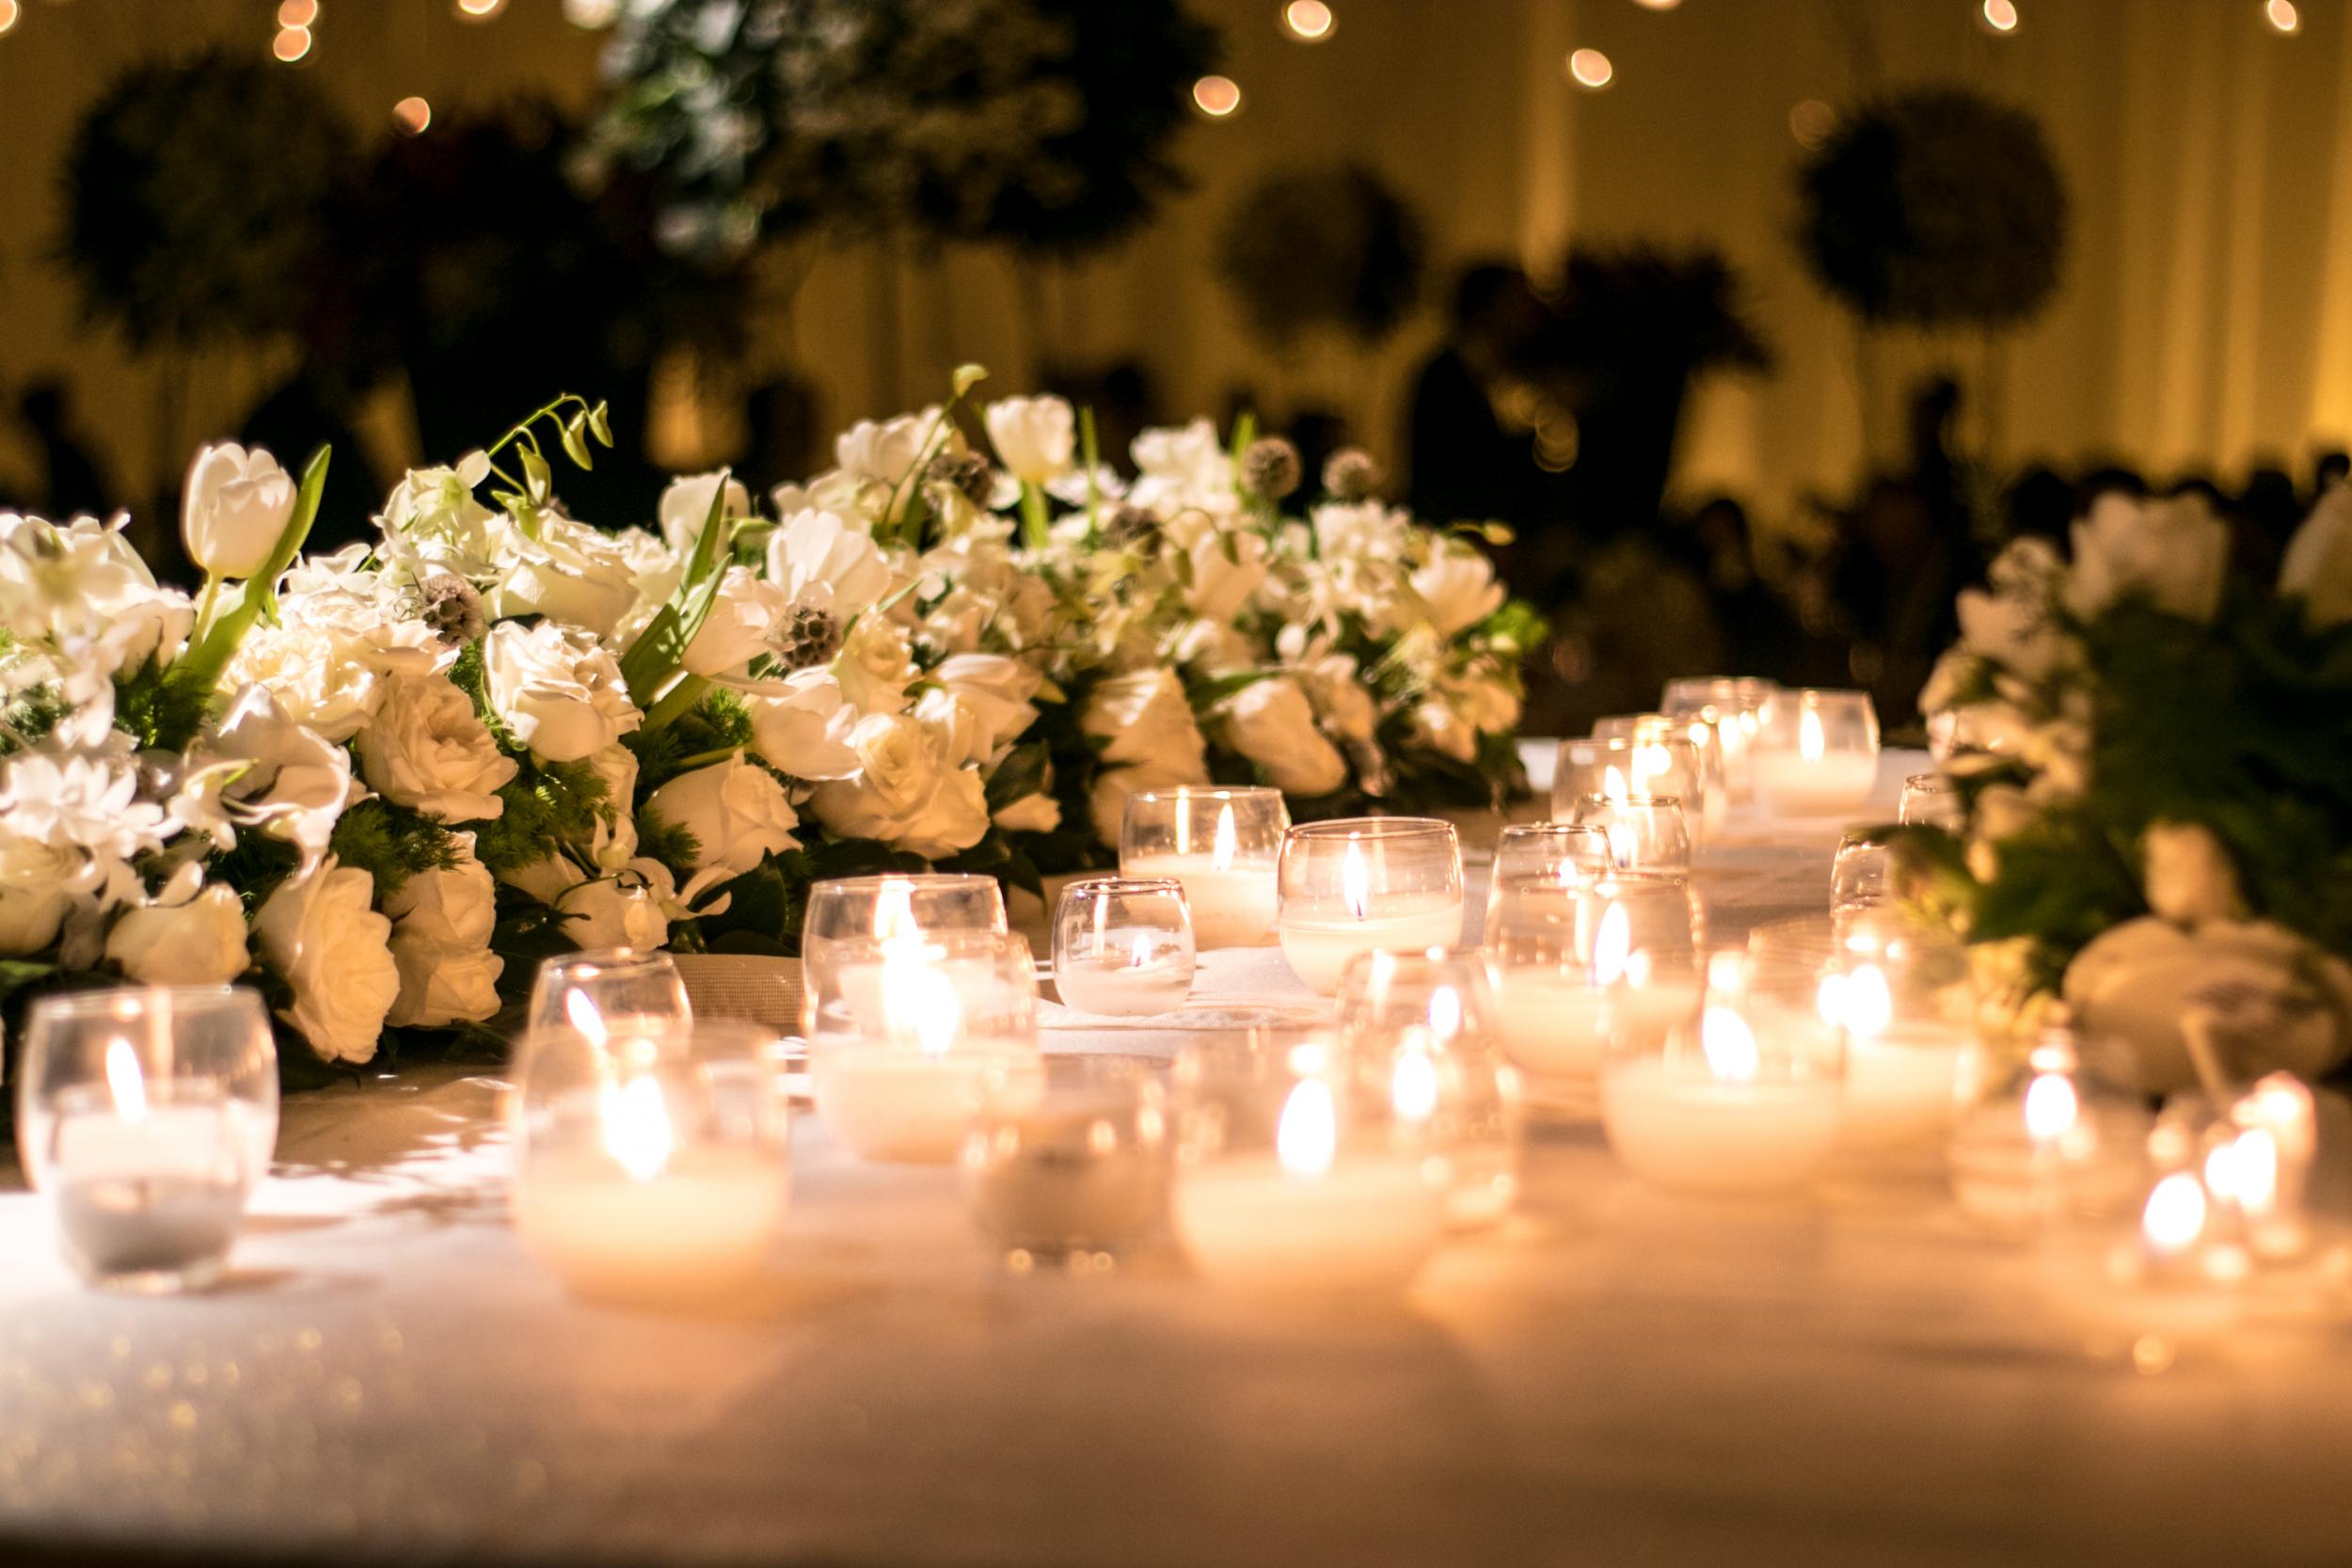 Wedding by candlelight